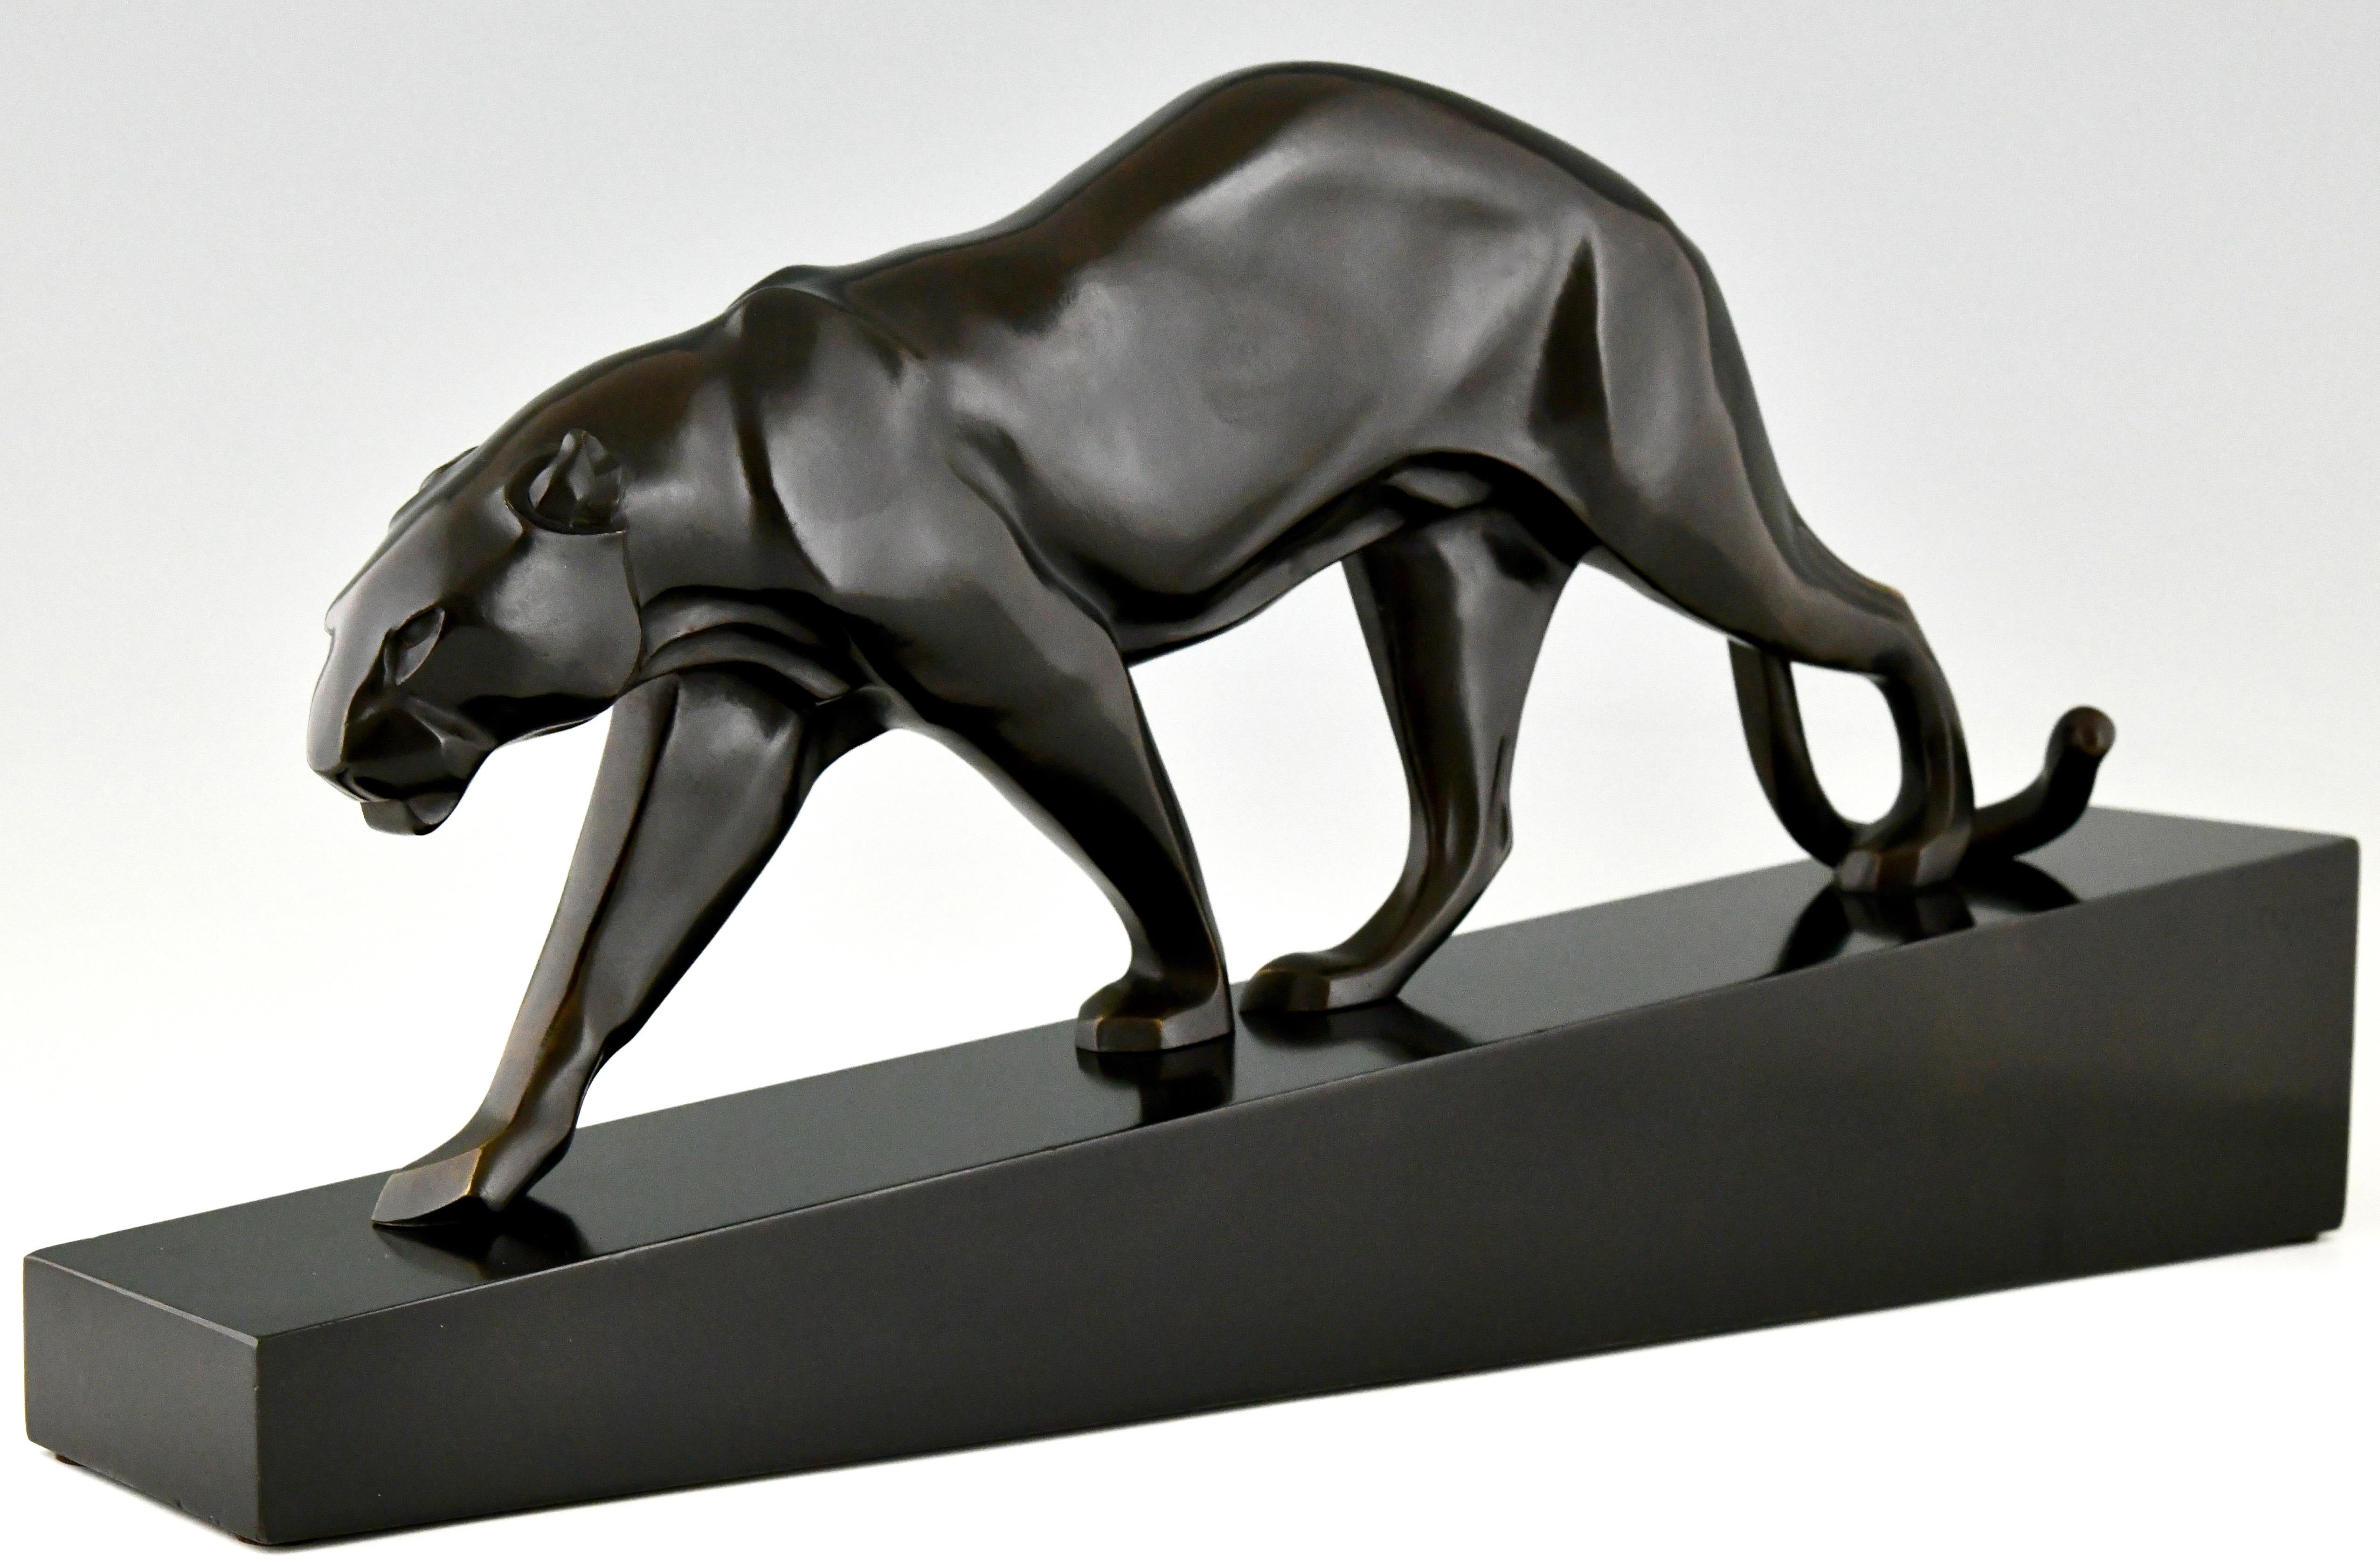 French Art Deco Bronze Sculpture Walking Panther by Maurice Prost, Susse Frères 1935